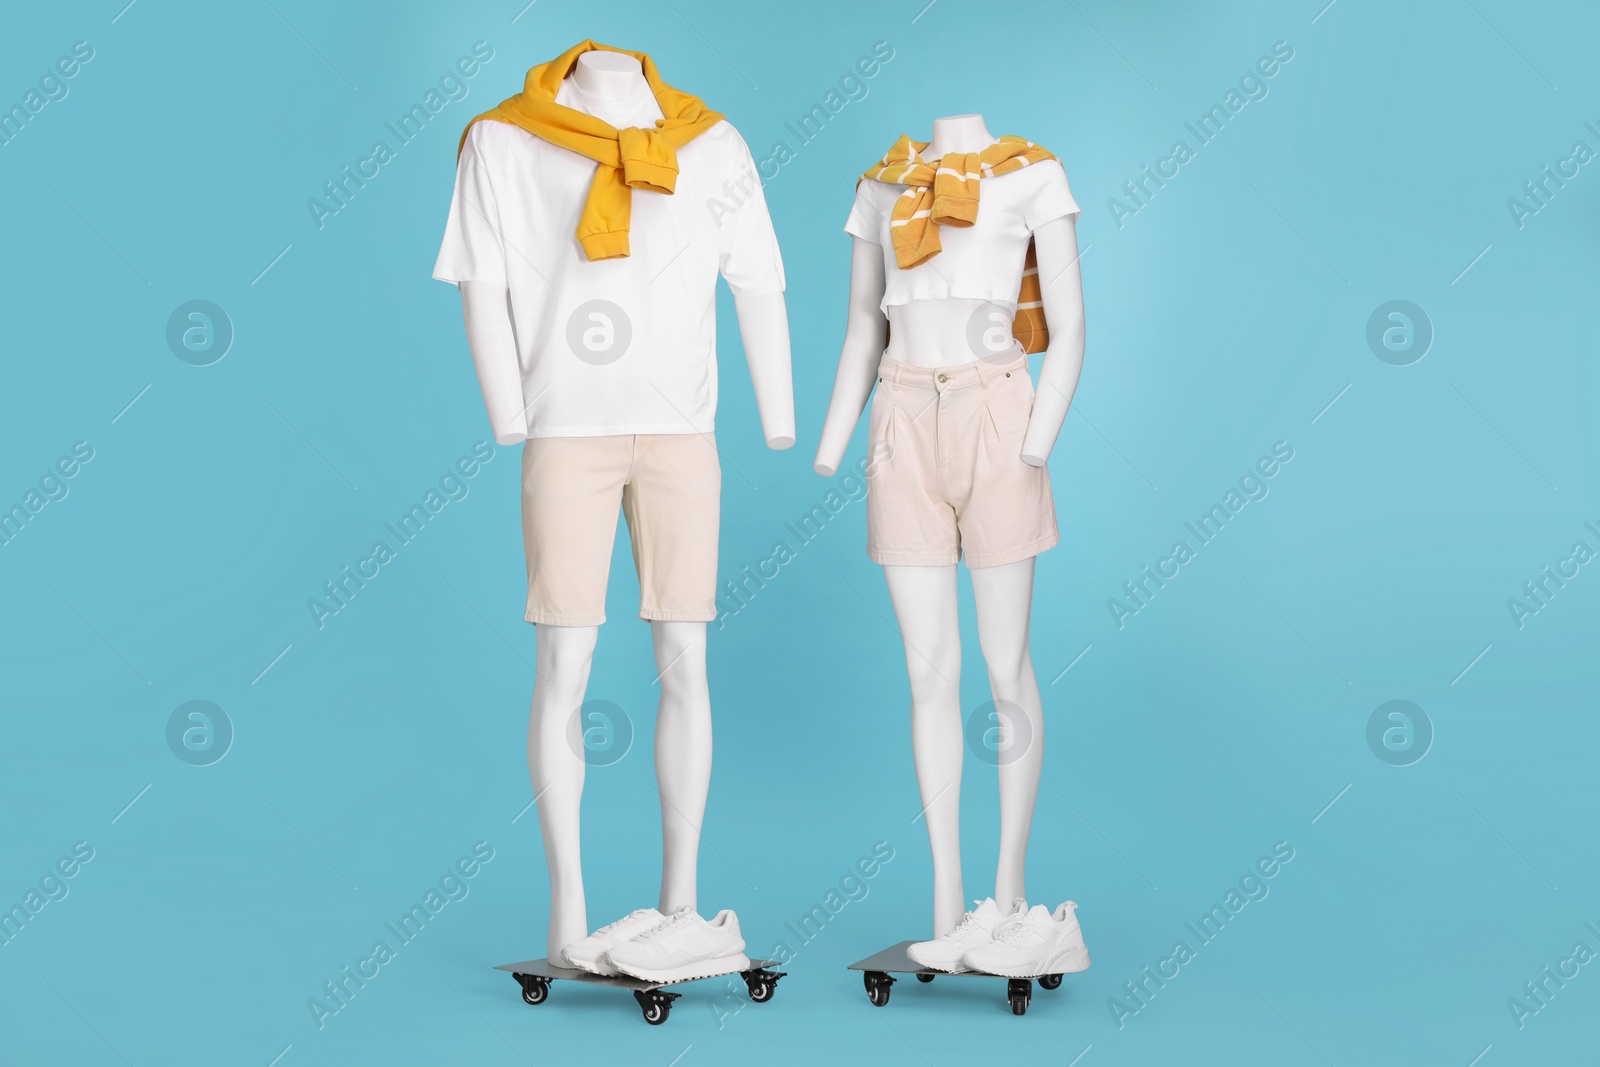 Photo of Female and male mannequins with sneakers dressed in white t-shirts, stylish shorts and orange sweaters on light blue background